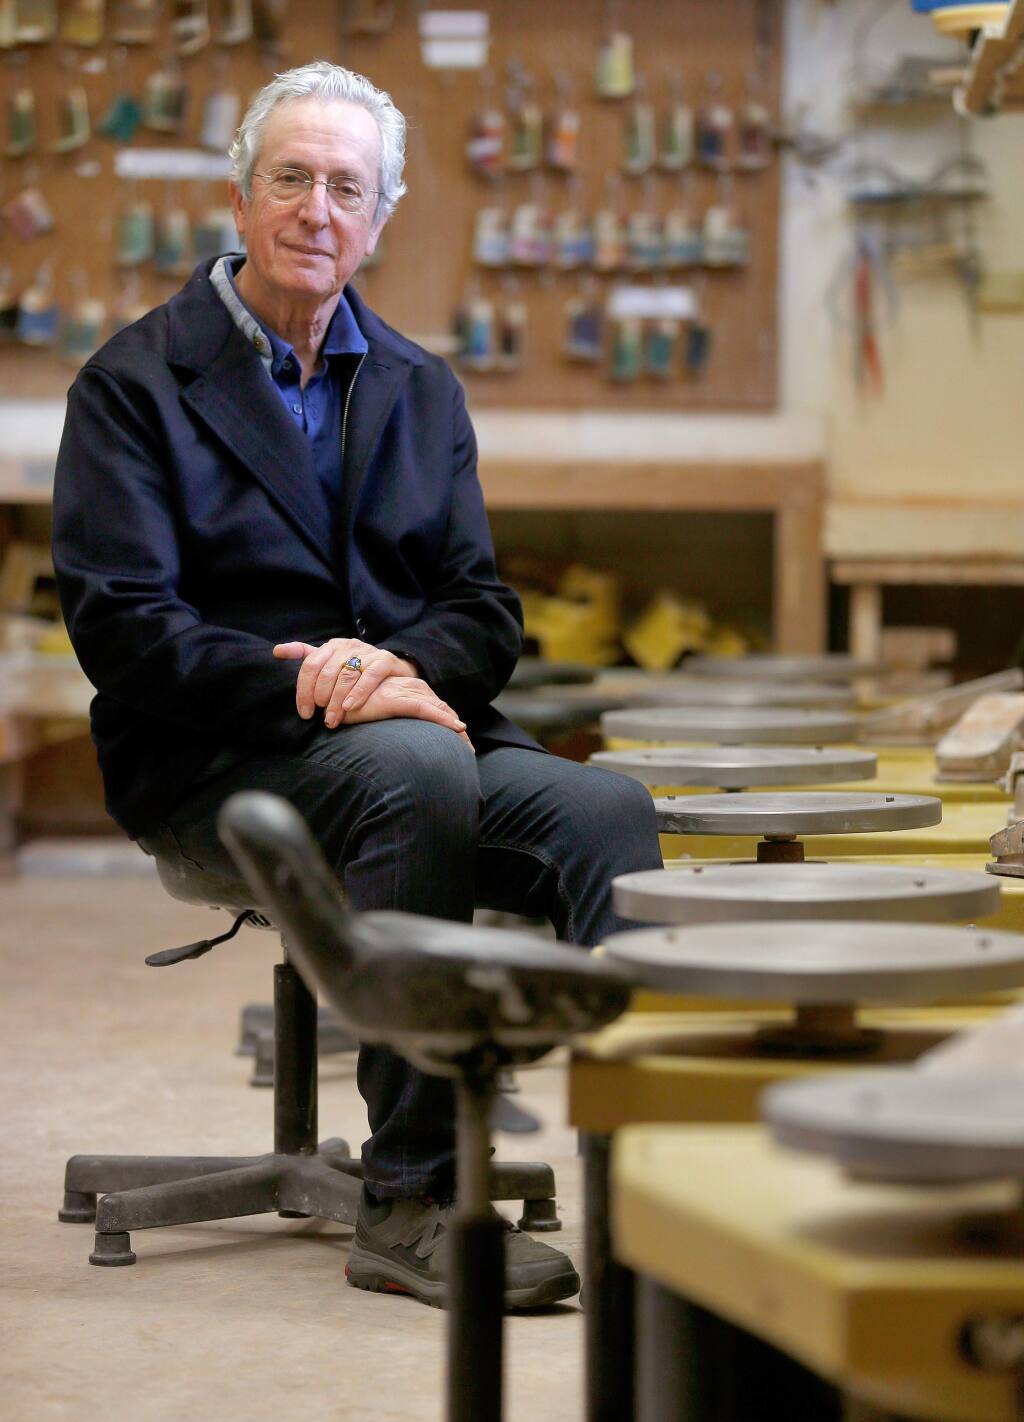 Robert Brent, board member of Sebastopol Center for the Arts and inventor of the Brent Pottery Wheel, poses for a portrait beside a row of his invention at Sebastopol Center for the Arts, in Sebastopol, California on Friday, January 5, 2018. (Alvin Jornada / The Press Democrat)